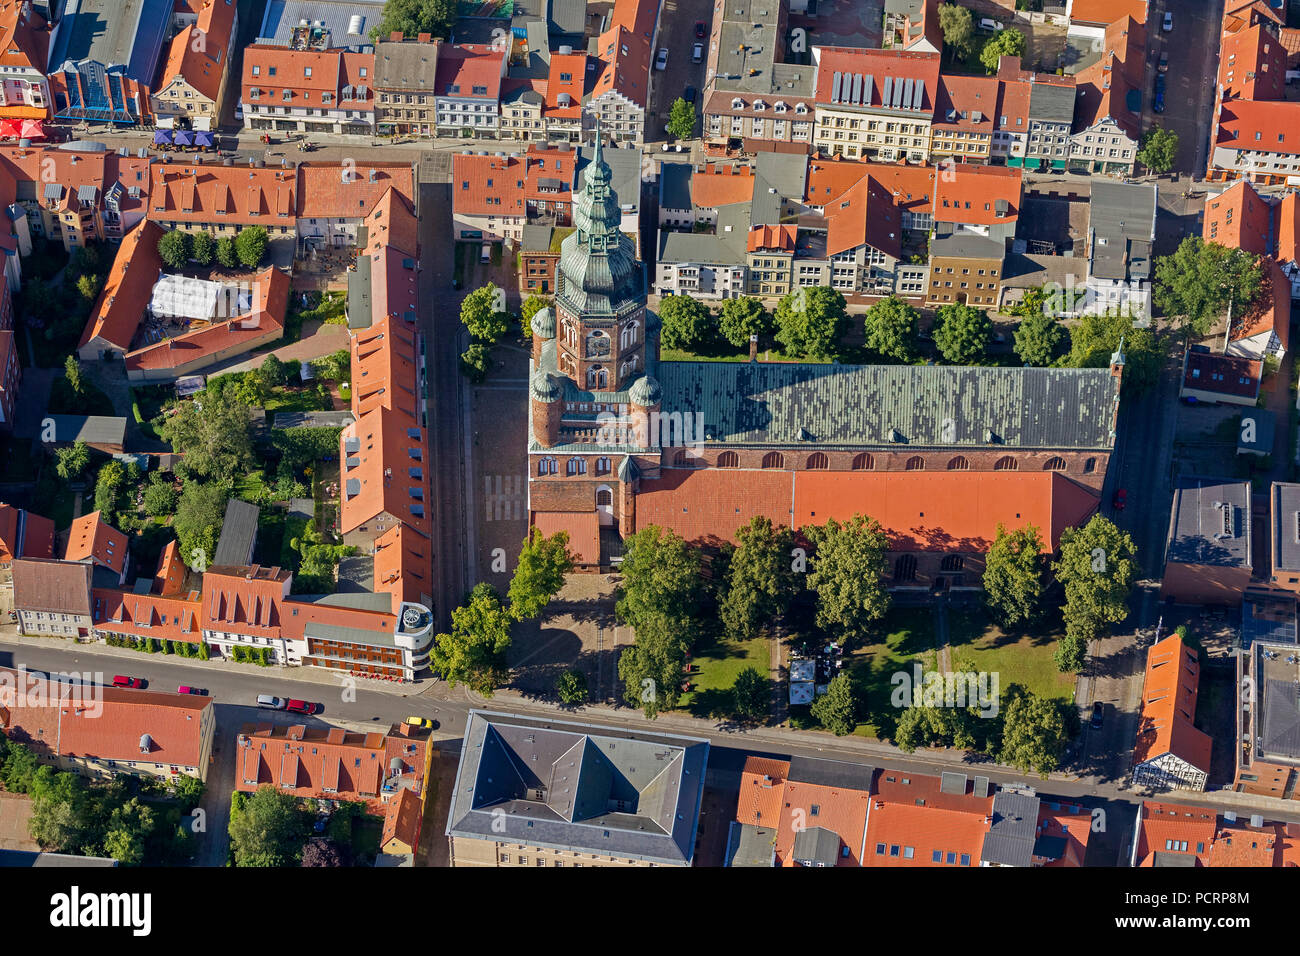 Aerial view, Greifswalder Dom St.Nikolai, The Cathedral St. Nikolai (around 1263) is also the largest church in the city, founding place of the university and preaching church of the Bishop of PEK, center, Greifswald, Mecklenburg-West Pomerania, Germany, Europe Stock Photo